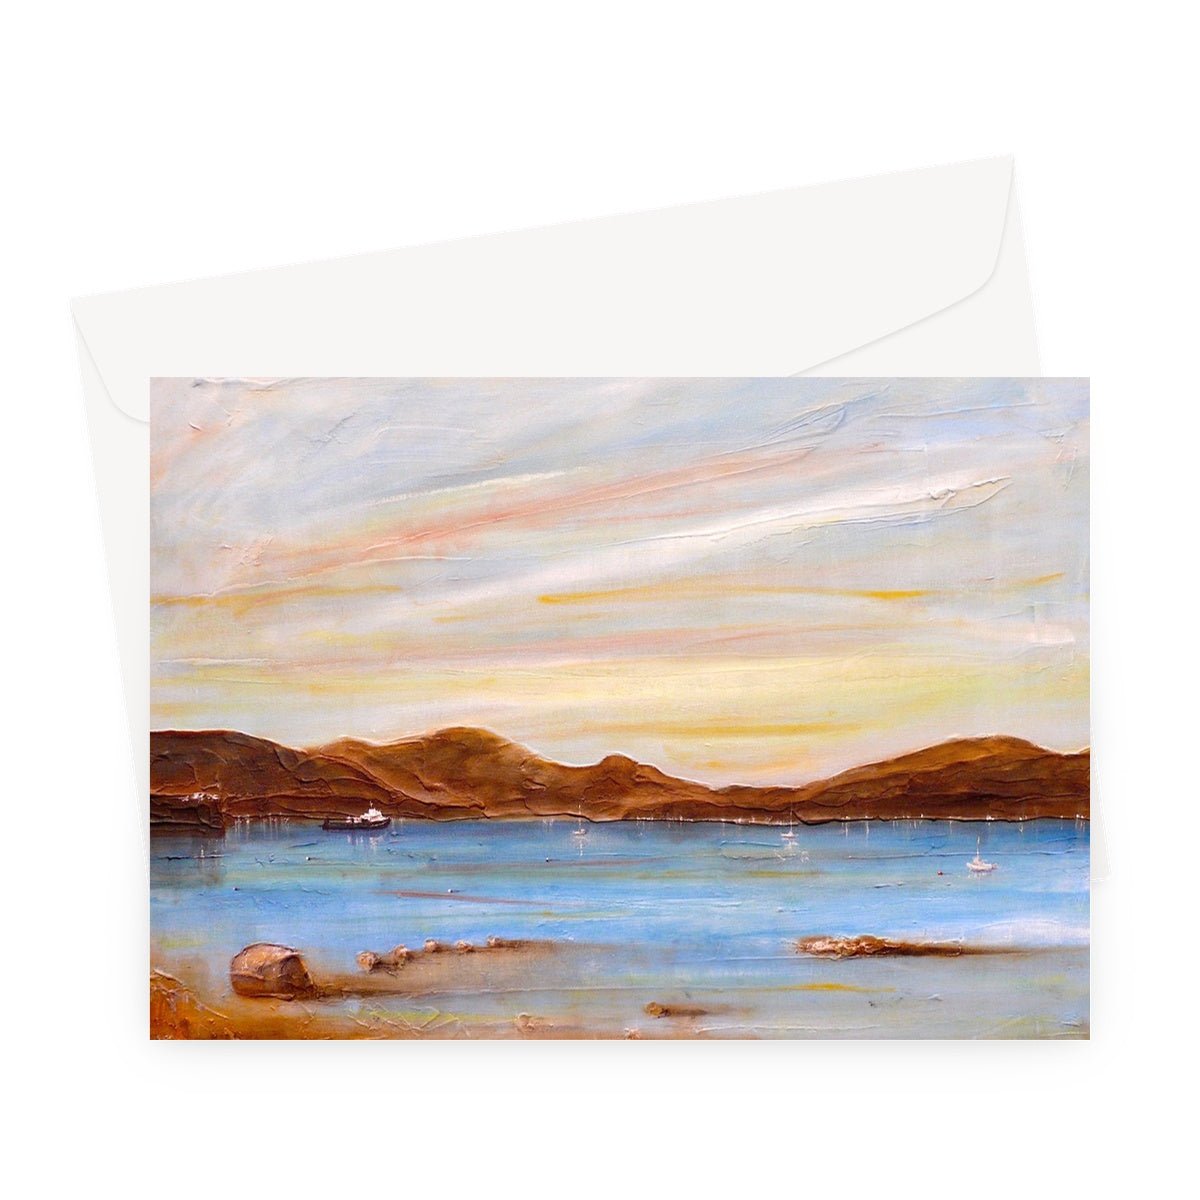 The Last Ferry To Dunoon Art Gifts Greeting Card-Greetings Cards-River Clyde Art Gallery-A5 Landscape-1 Card-Paintings, Prints, Homeware, Art Gifts From Scotland By Scottish Artist Kevin Hunter